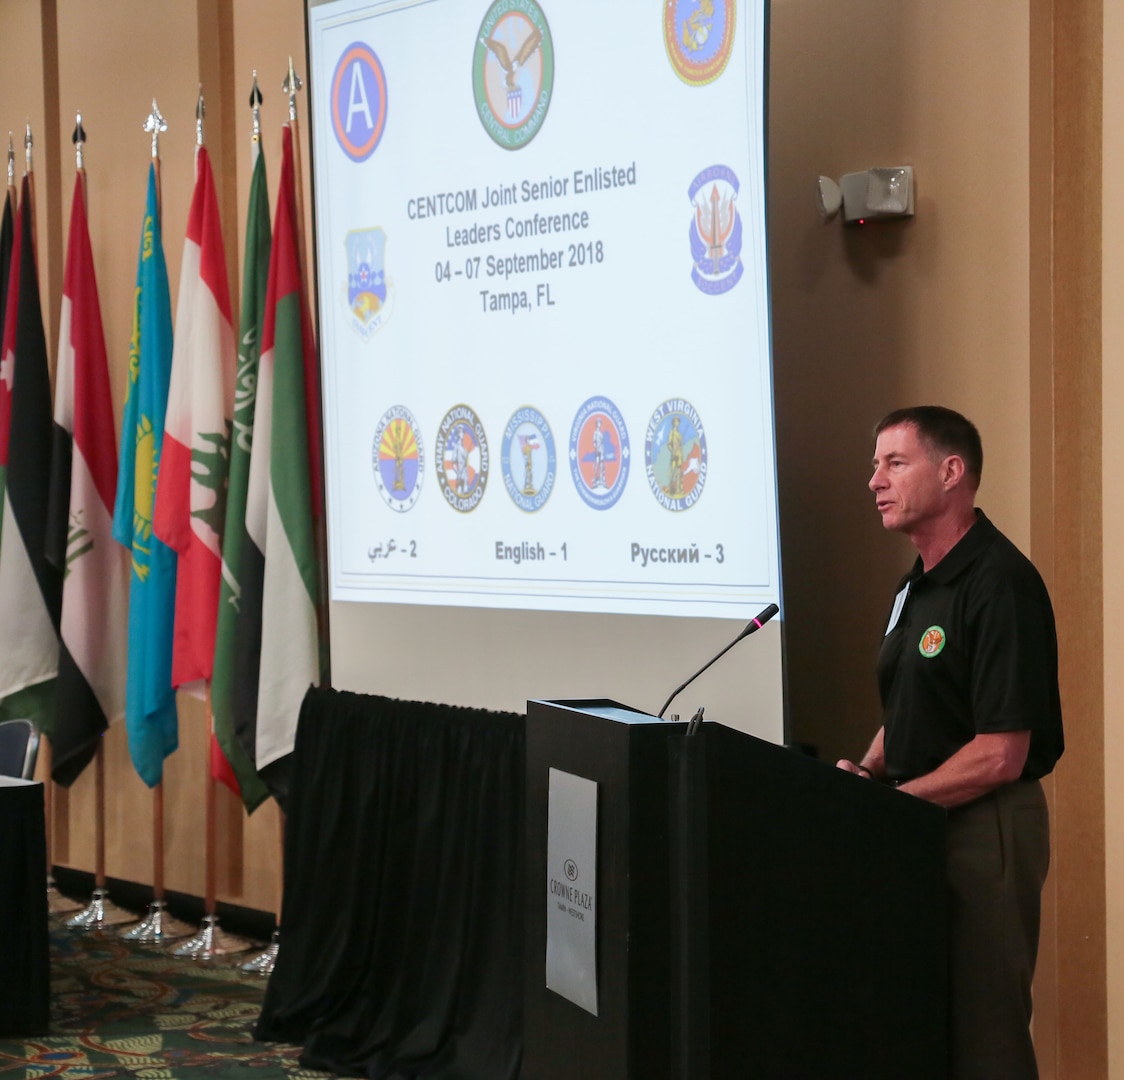 U.S. Army Command Sgt. Maj. William Thetford, U.S. Central Command’s senior enlisted leader delivers welcomes attendees and delivers opening remarks during the CENTCOM Joint Senior Enlisted Leaders Conference in Tampa, Fla. Sept. 6, 2018. The purpose of the four-day U.S. Central Command hosted conference is to provide a forum for senior enlisted leaders to explore ways to empower and develop their non-commissioned officer ranks and to build a network of multi-national senior enlisted professionals. Senior enlisted leaders from CENTCOM's component commands, five National Guard units and representatives from eight partner nations. (U.S. Central Command Public Affairs photo by Tom Gagnier)